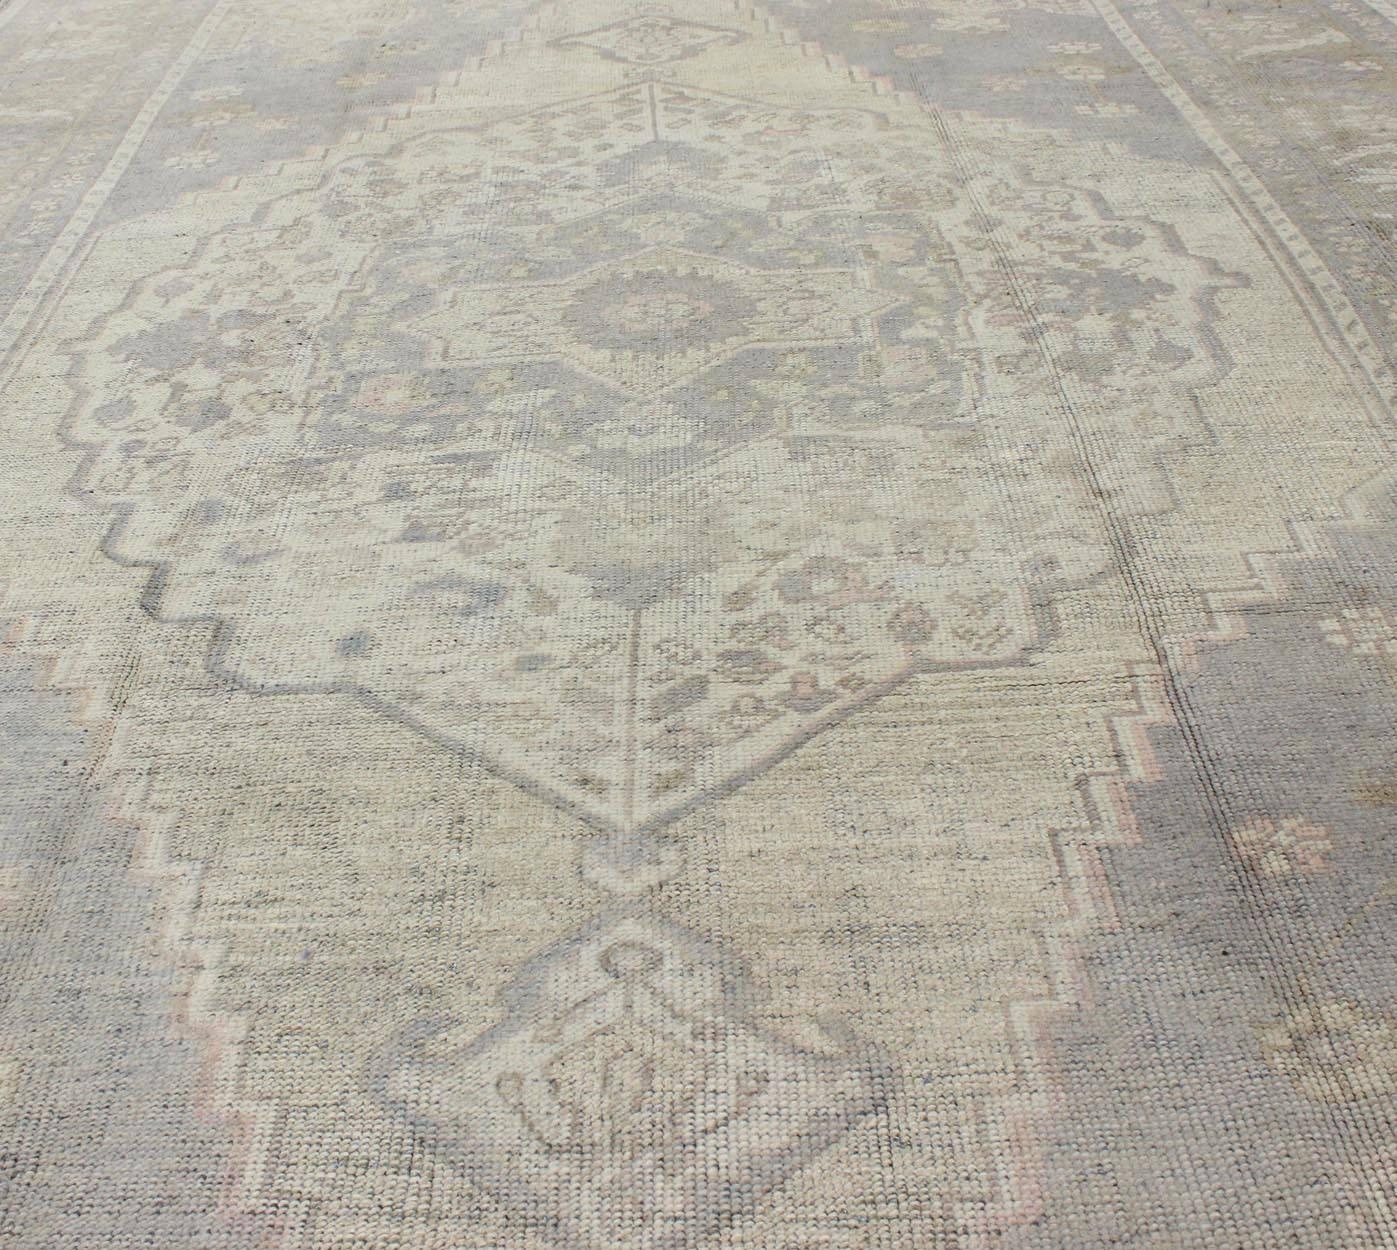 Vintage Oushak in Muted Colors of Gray, Taupe, Cream and Light Brown 1